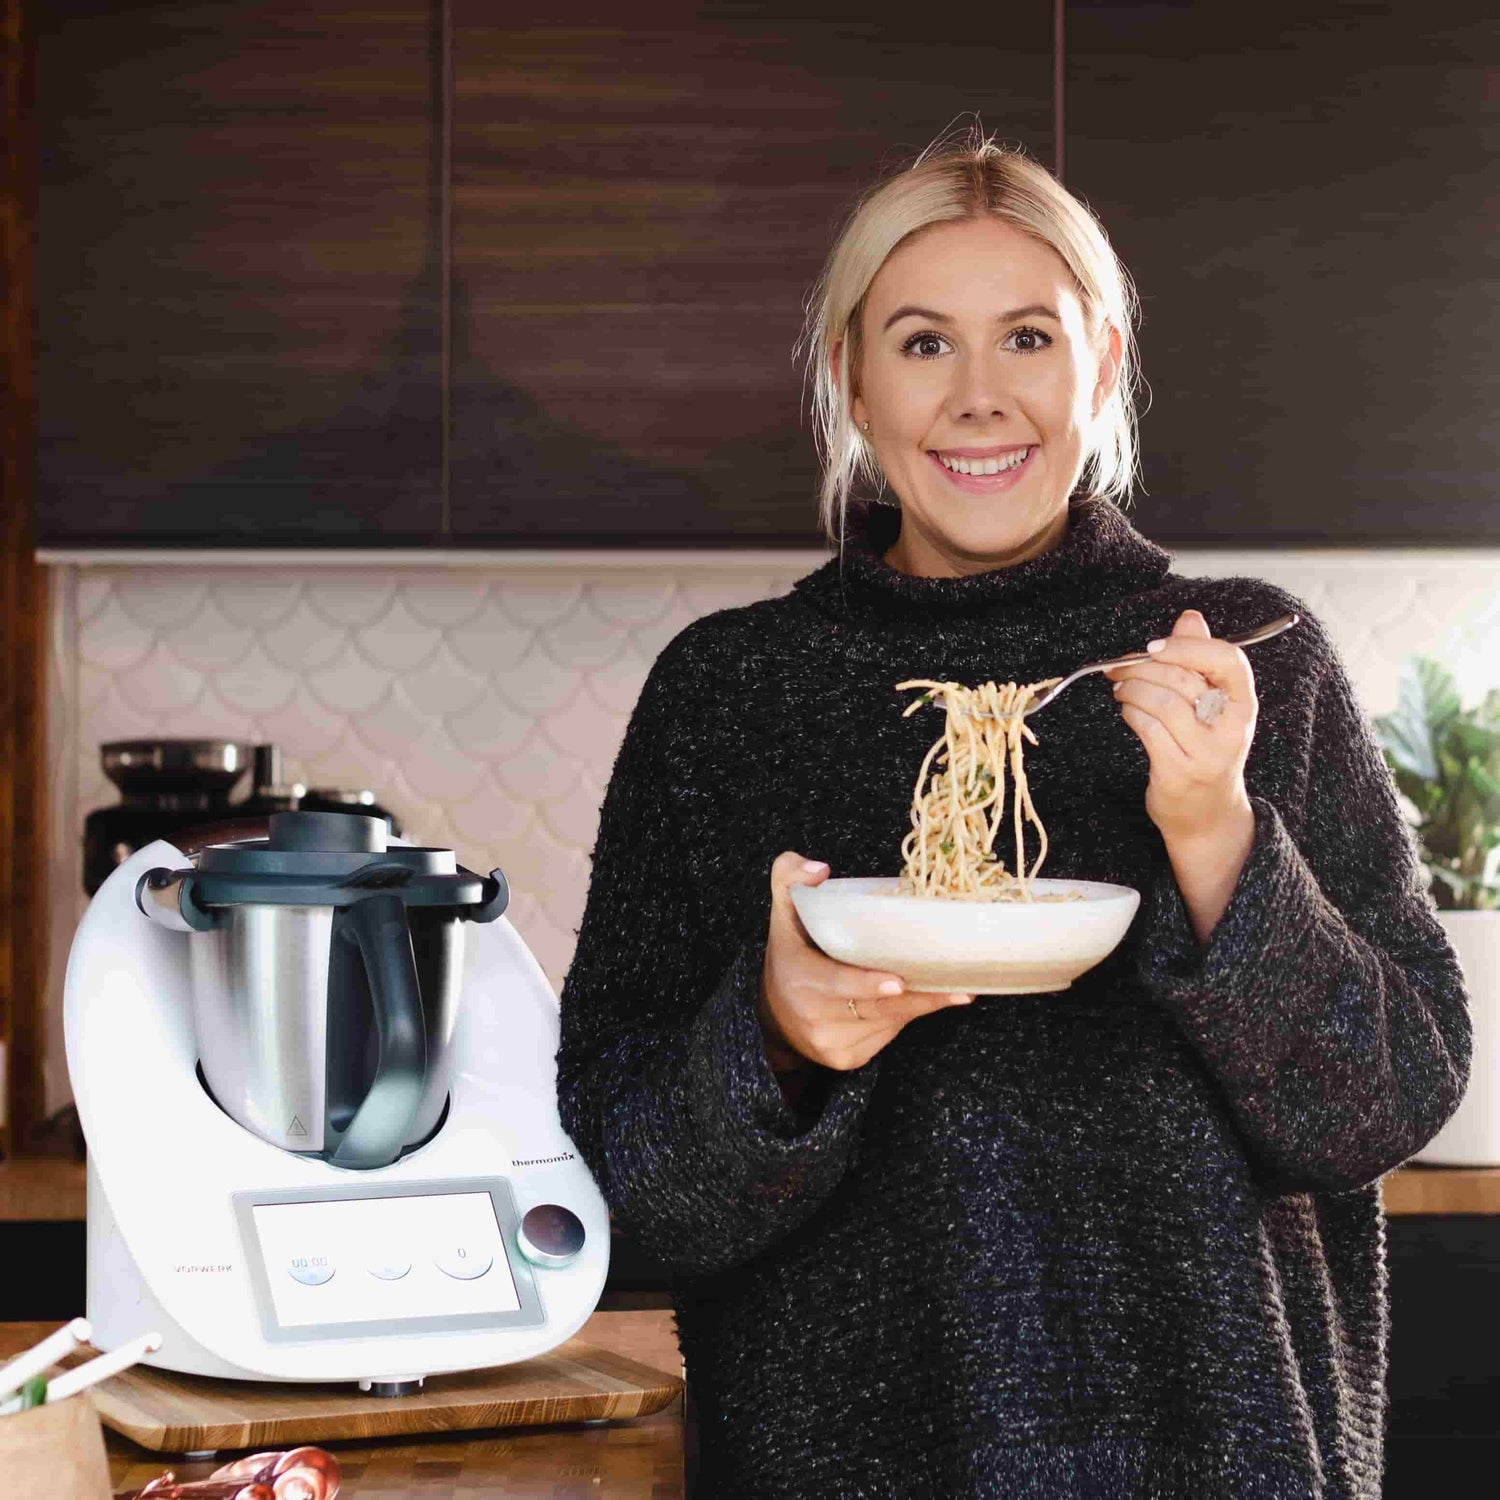 Alyce's Thermomix Journey - a Lasting Love Affair